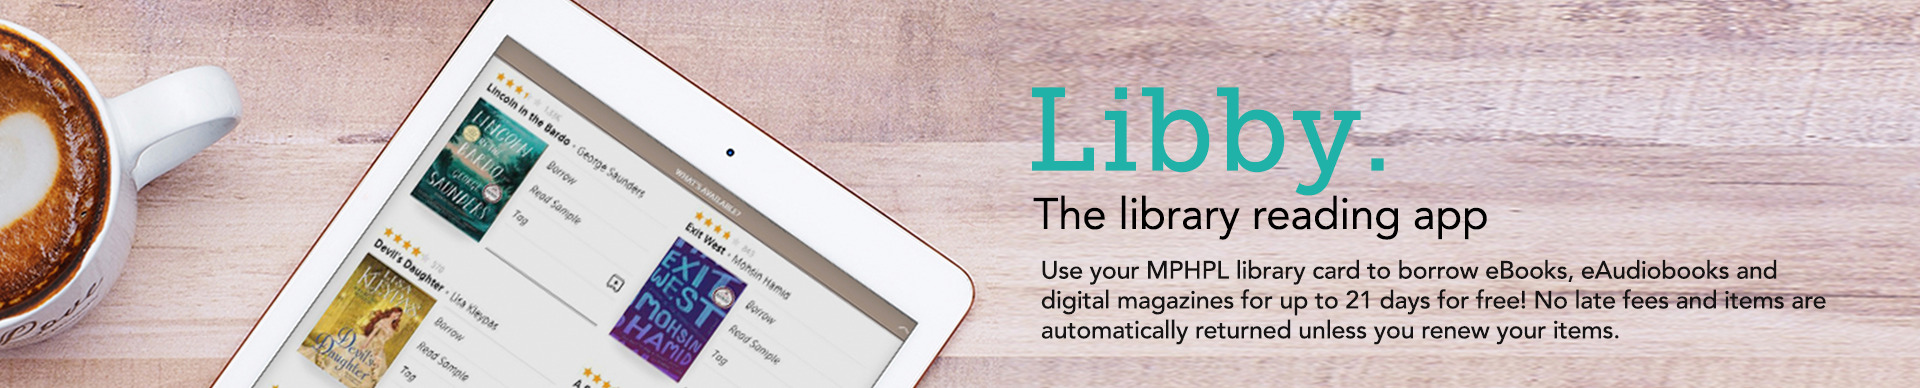 The library reading app
Use your MPHPL library card to borrow eBooks, eAudiobooks and digital magazines for up to 21 days for free! No late fees and items are automatically returned unless you renew your items.